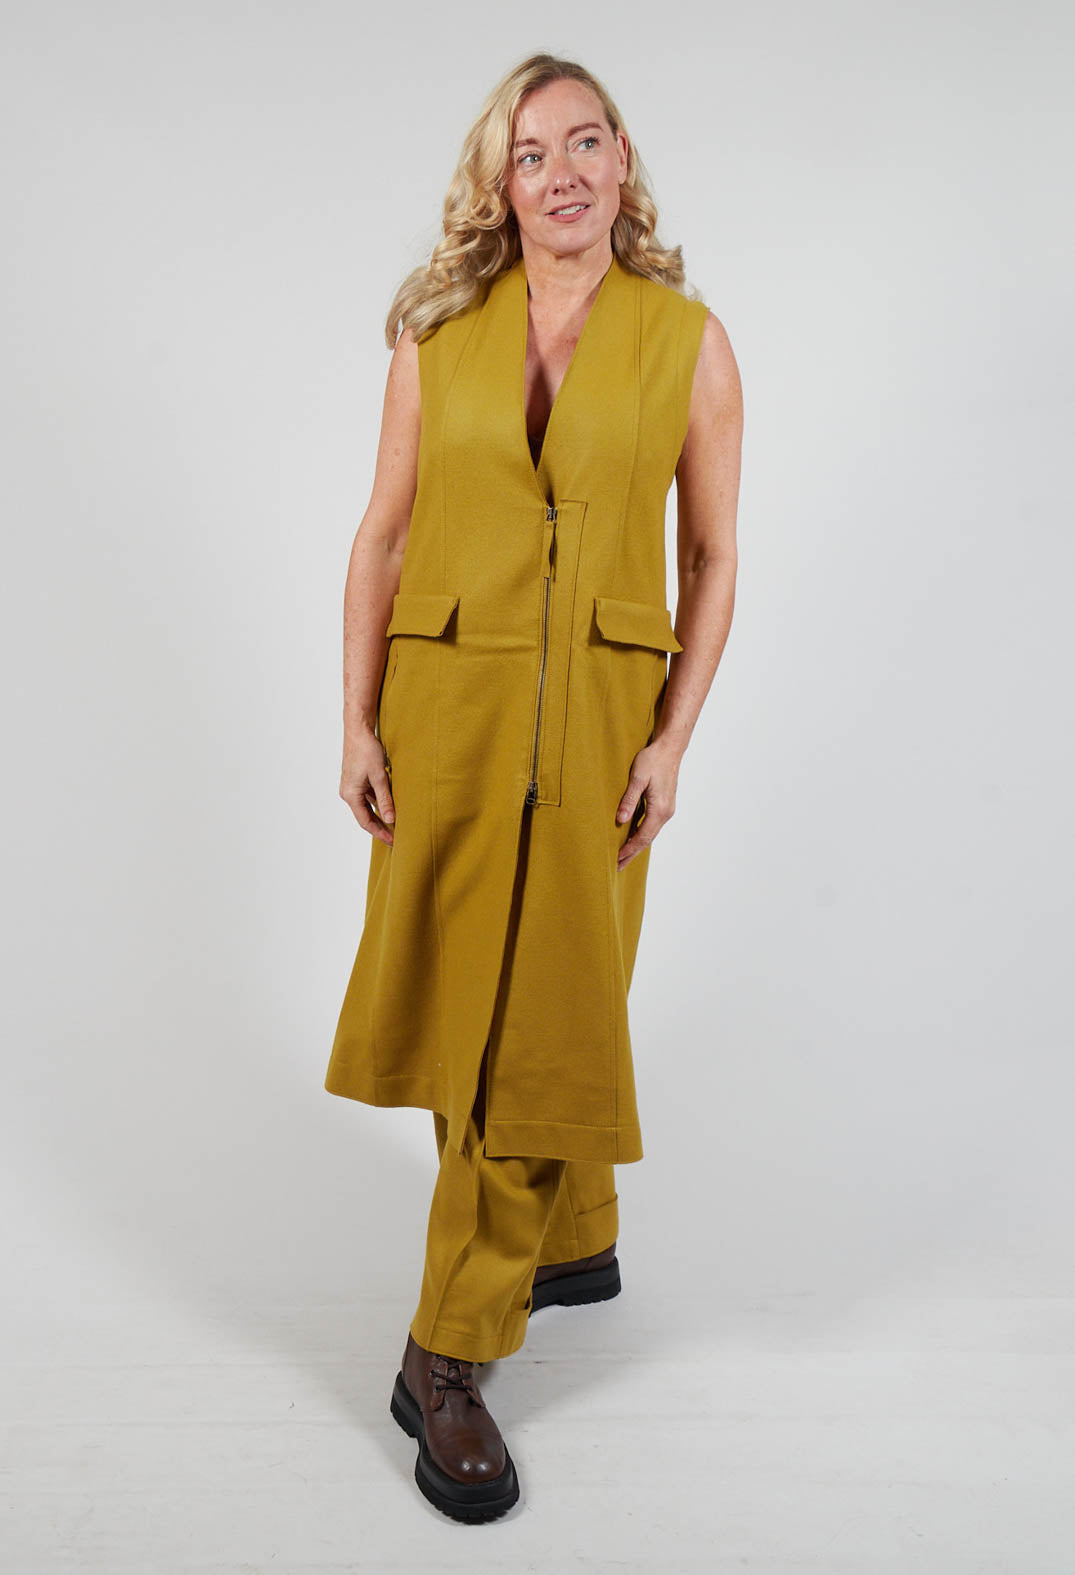 lady wearing a mustard campo vest and chunky brown boots